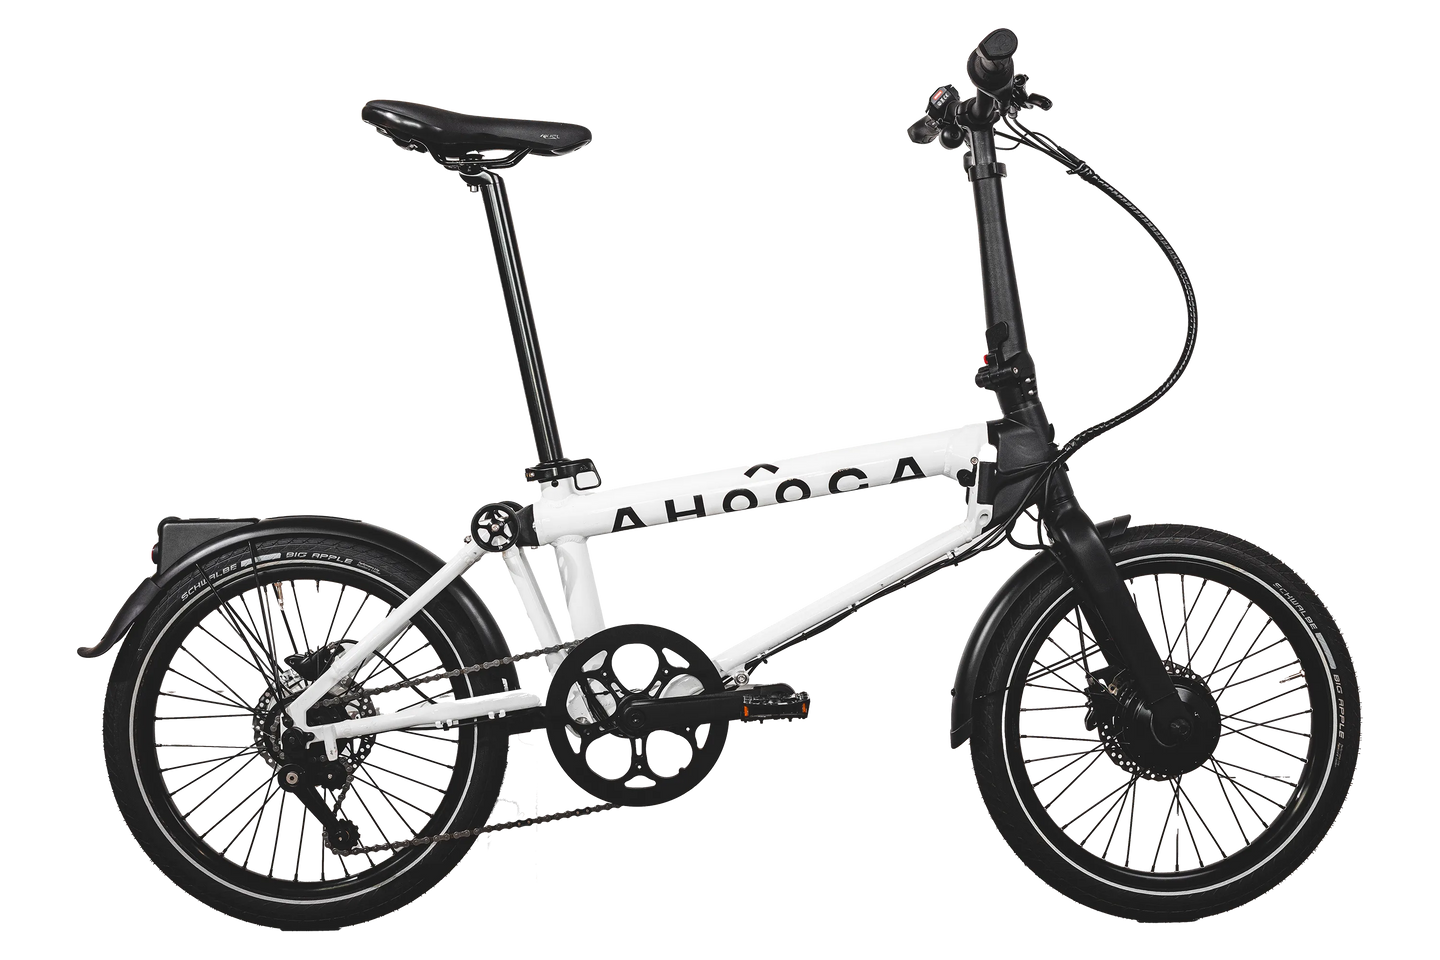 A product image of the Ahooga Max folding electric bike showing the right side of the bike. The bike frame is white with black accents. The Ahooga Max folding electric bike is available to buy from Bleeper.